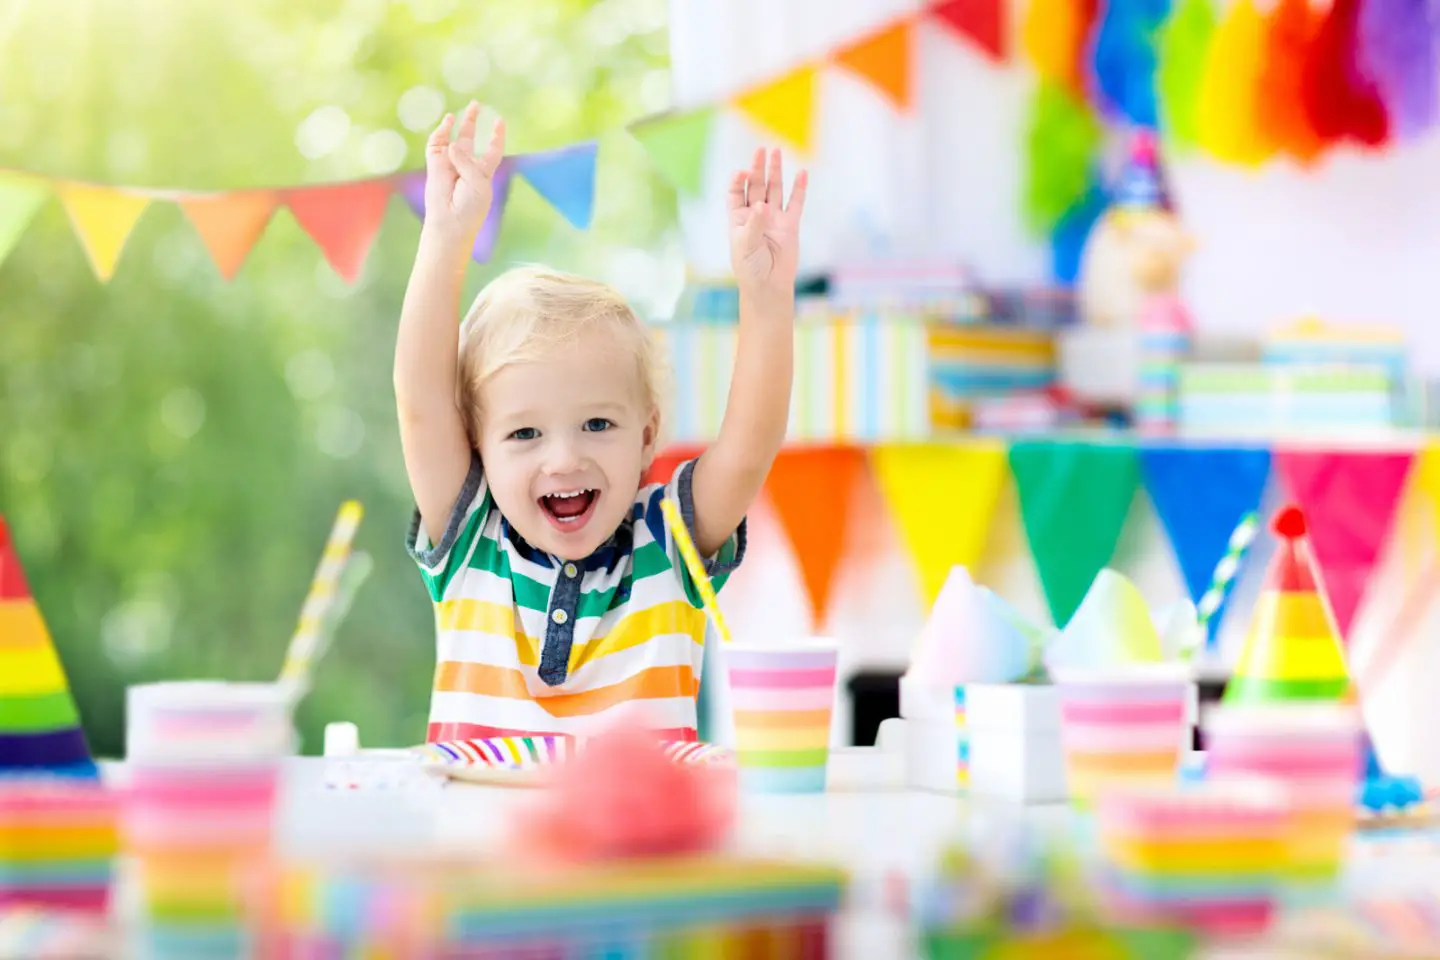 Kids birthday party. Child blowing out candles on colorful cake. Decorated home with rainbow flag banners, balloons. Farm animals theme celebration. Little boy celebrating birthday. Party food.